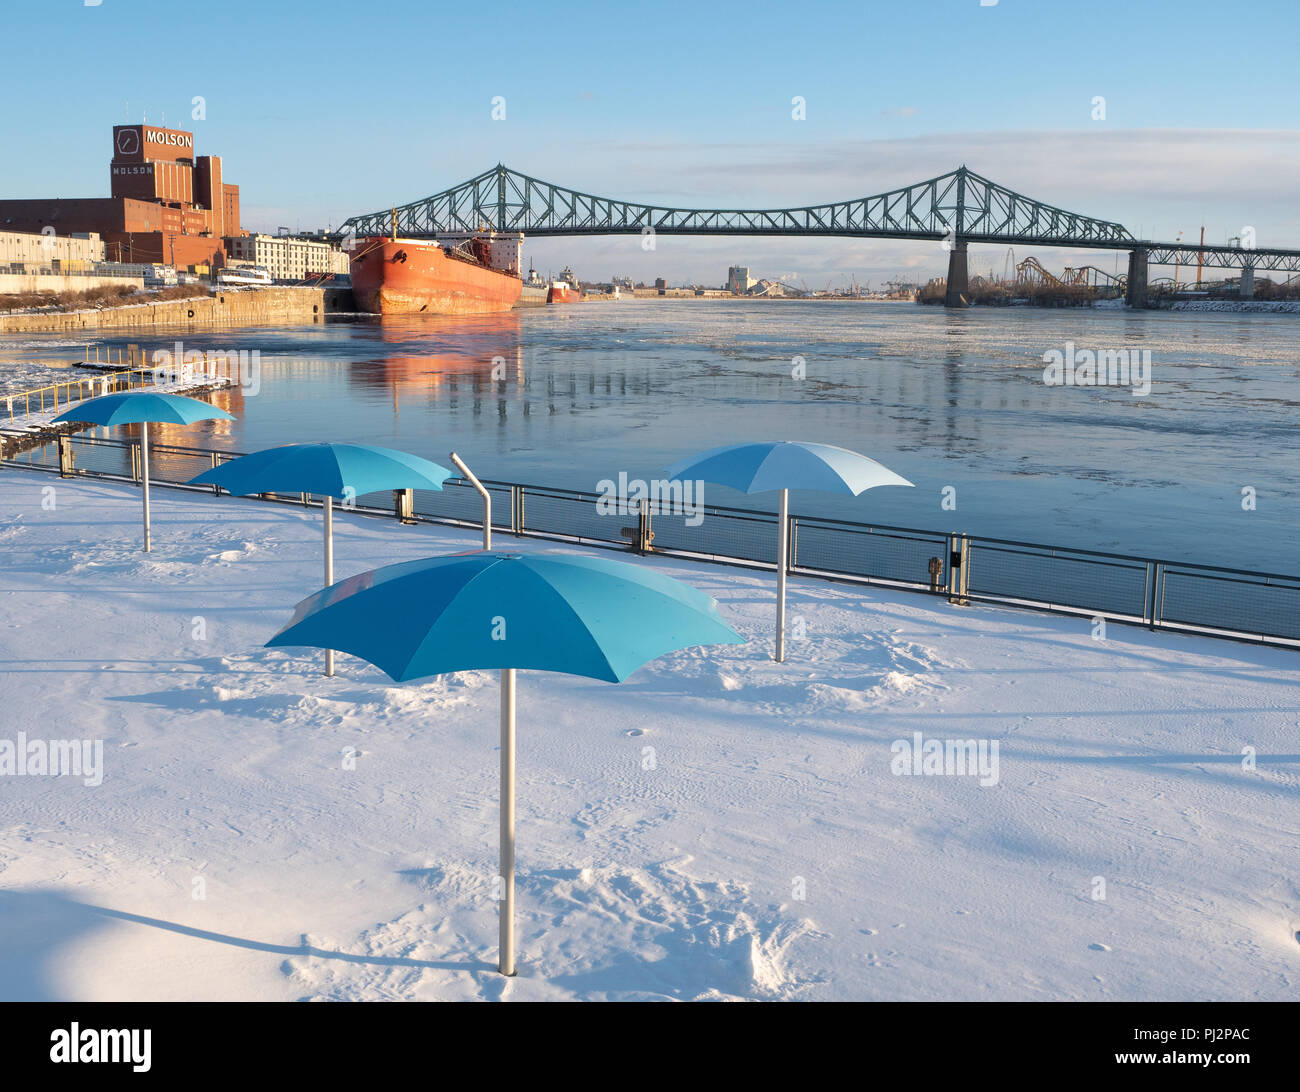 The Clock Tower Beach in Montreal under snow with the St. Lawrence River with the Molson brewery and a large ship in the background. The Jacques Carti Stock Photo